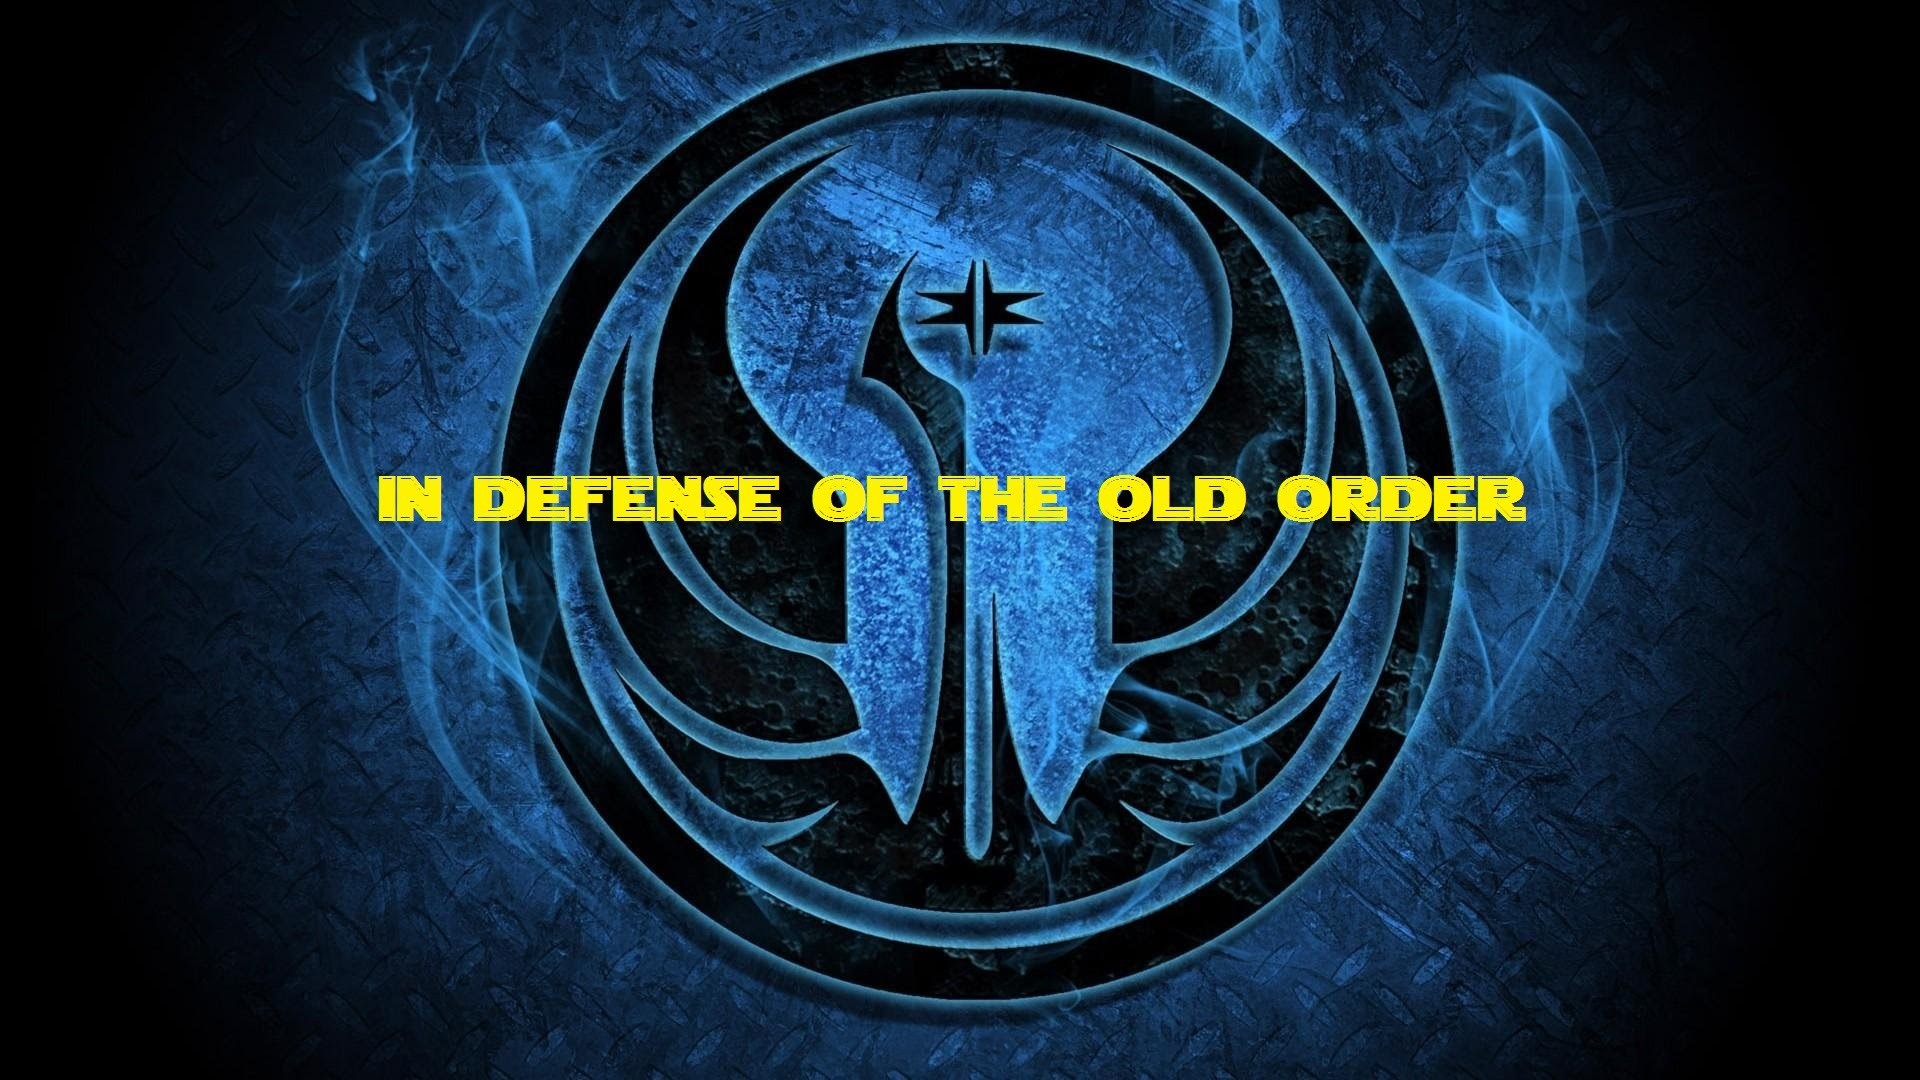 My Defense for the Old Jedi Order